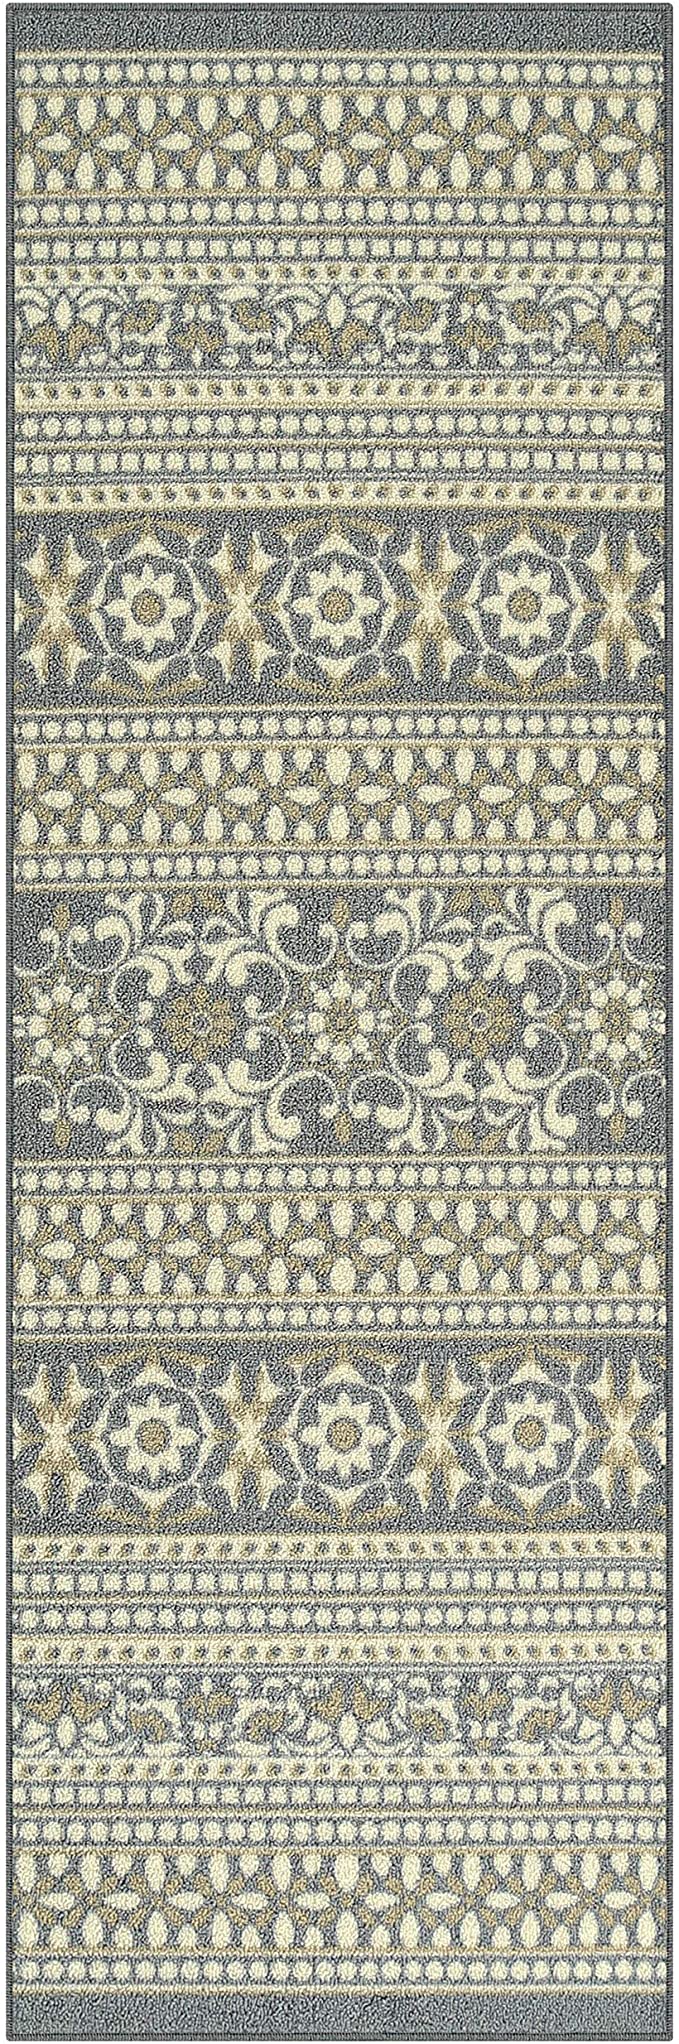 Maples Rugs Zoe Area Rugs for Living Room & Bedroom [Made in USA], 5 x 7, Grey